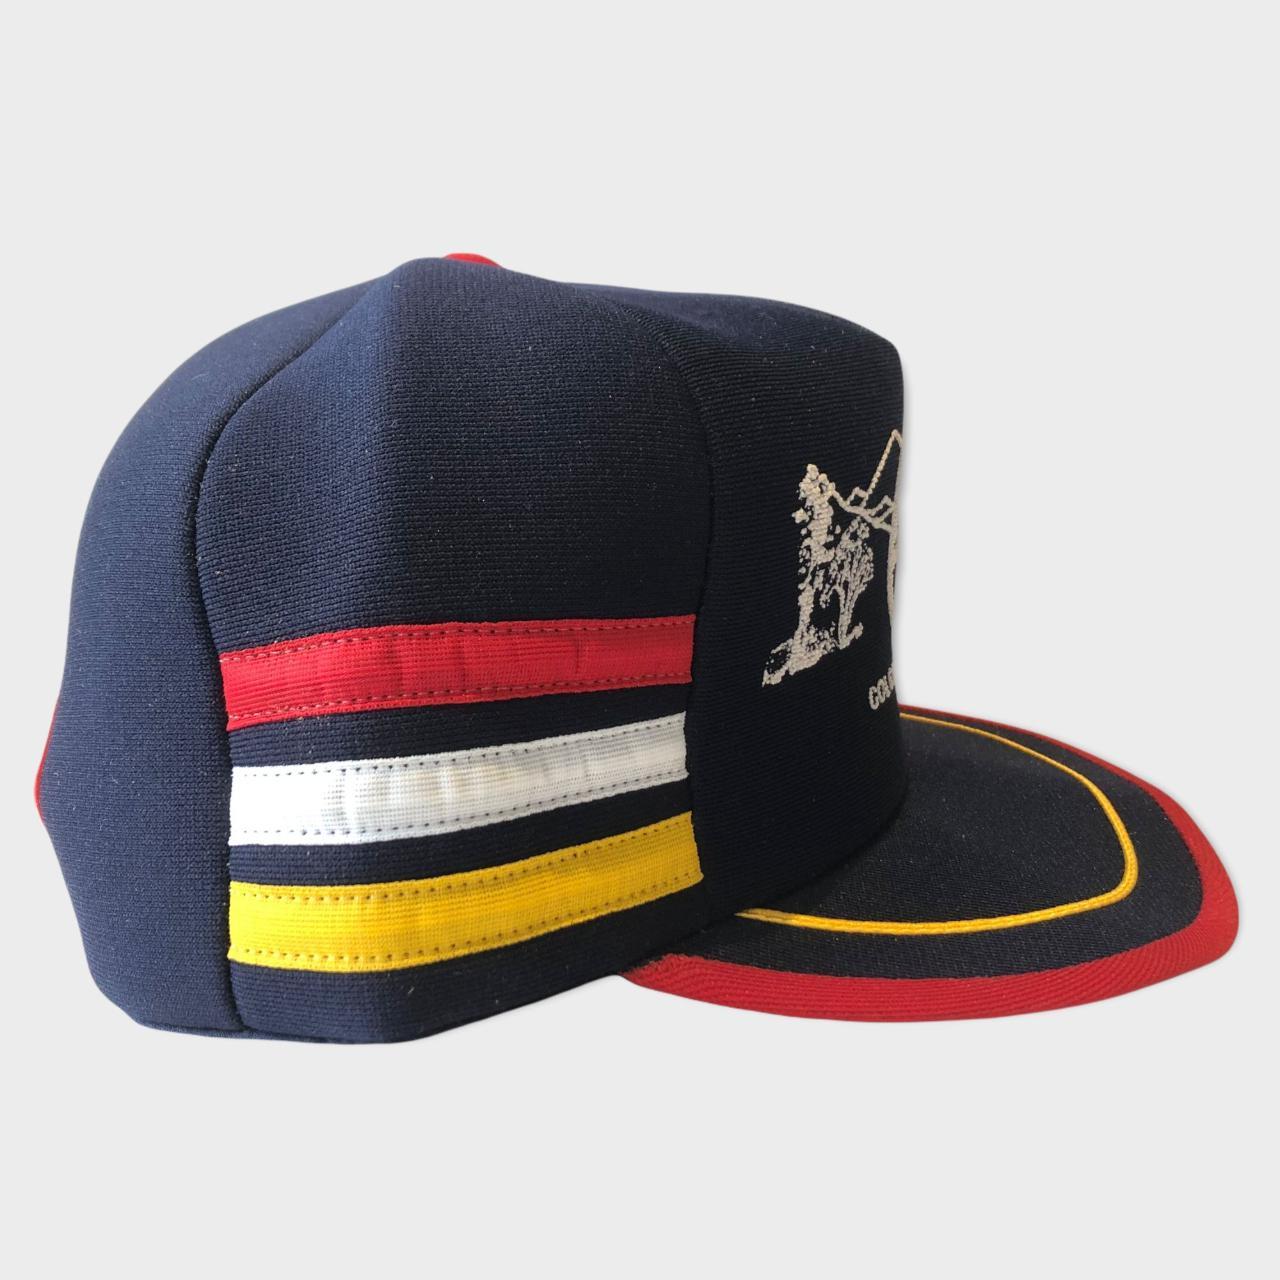 Men's Navy and White Hat (3)